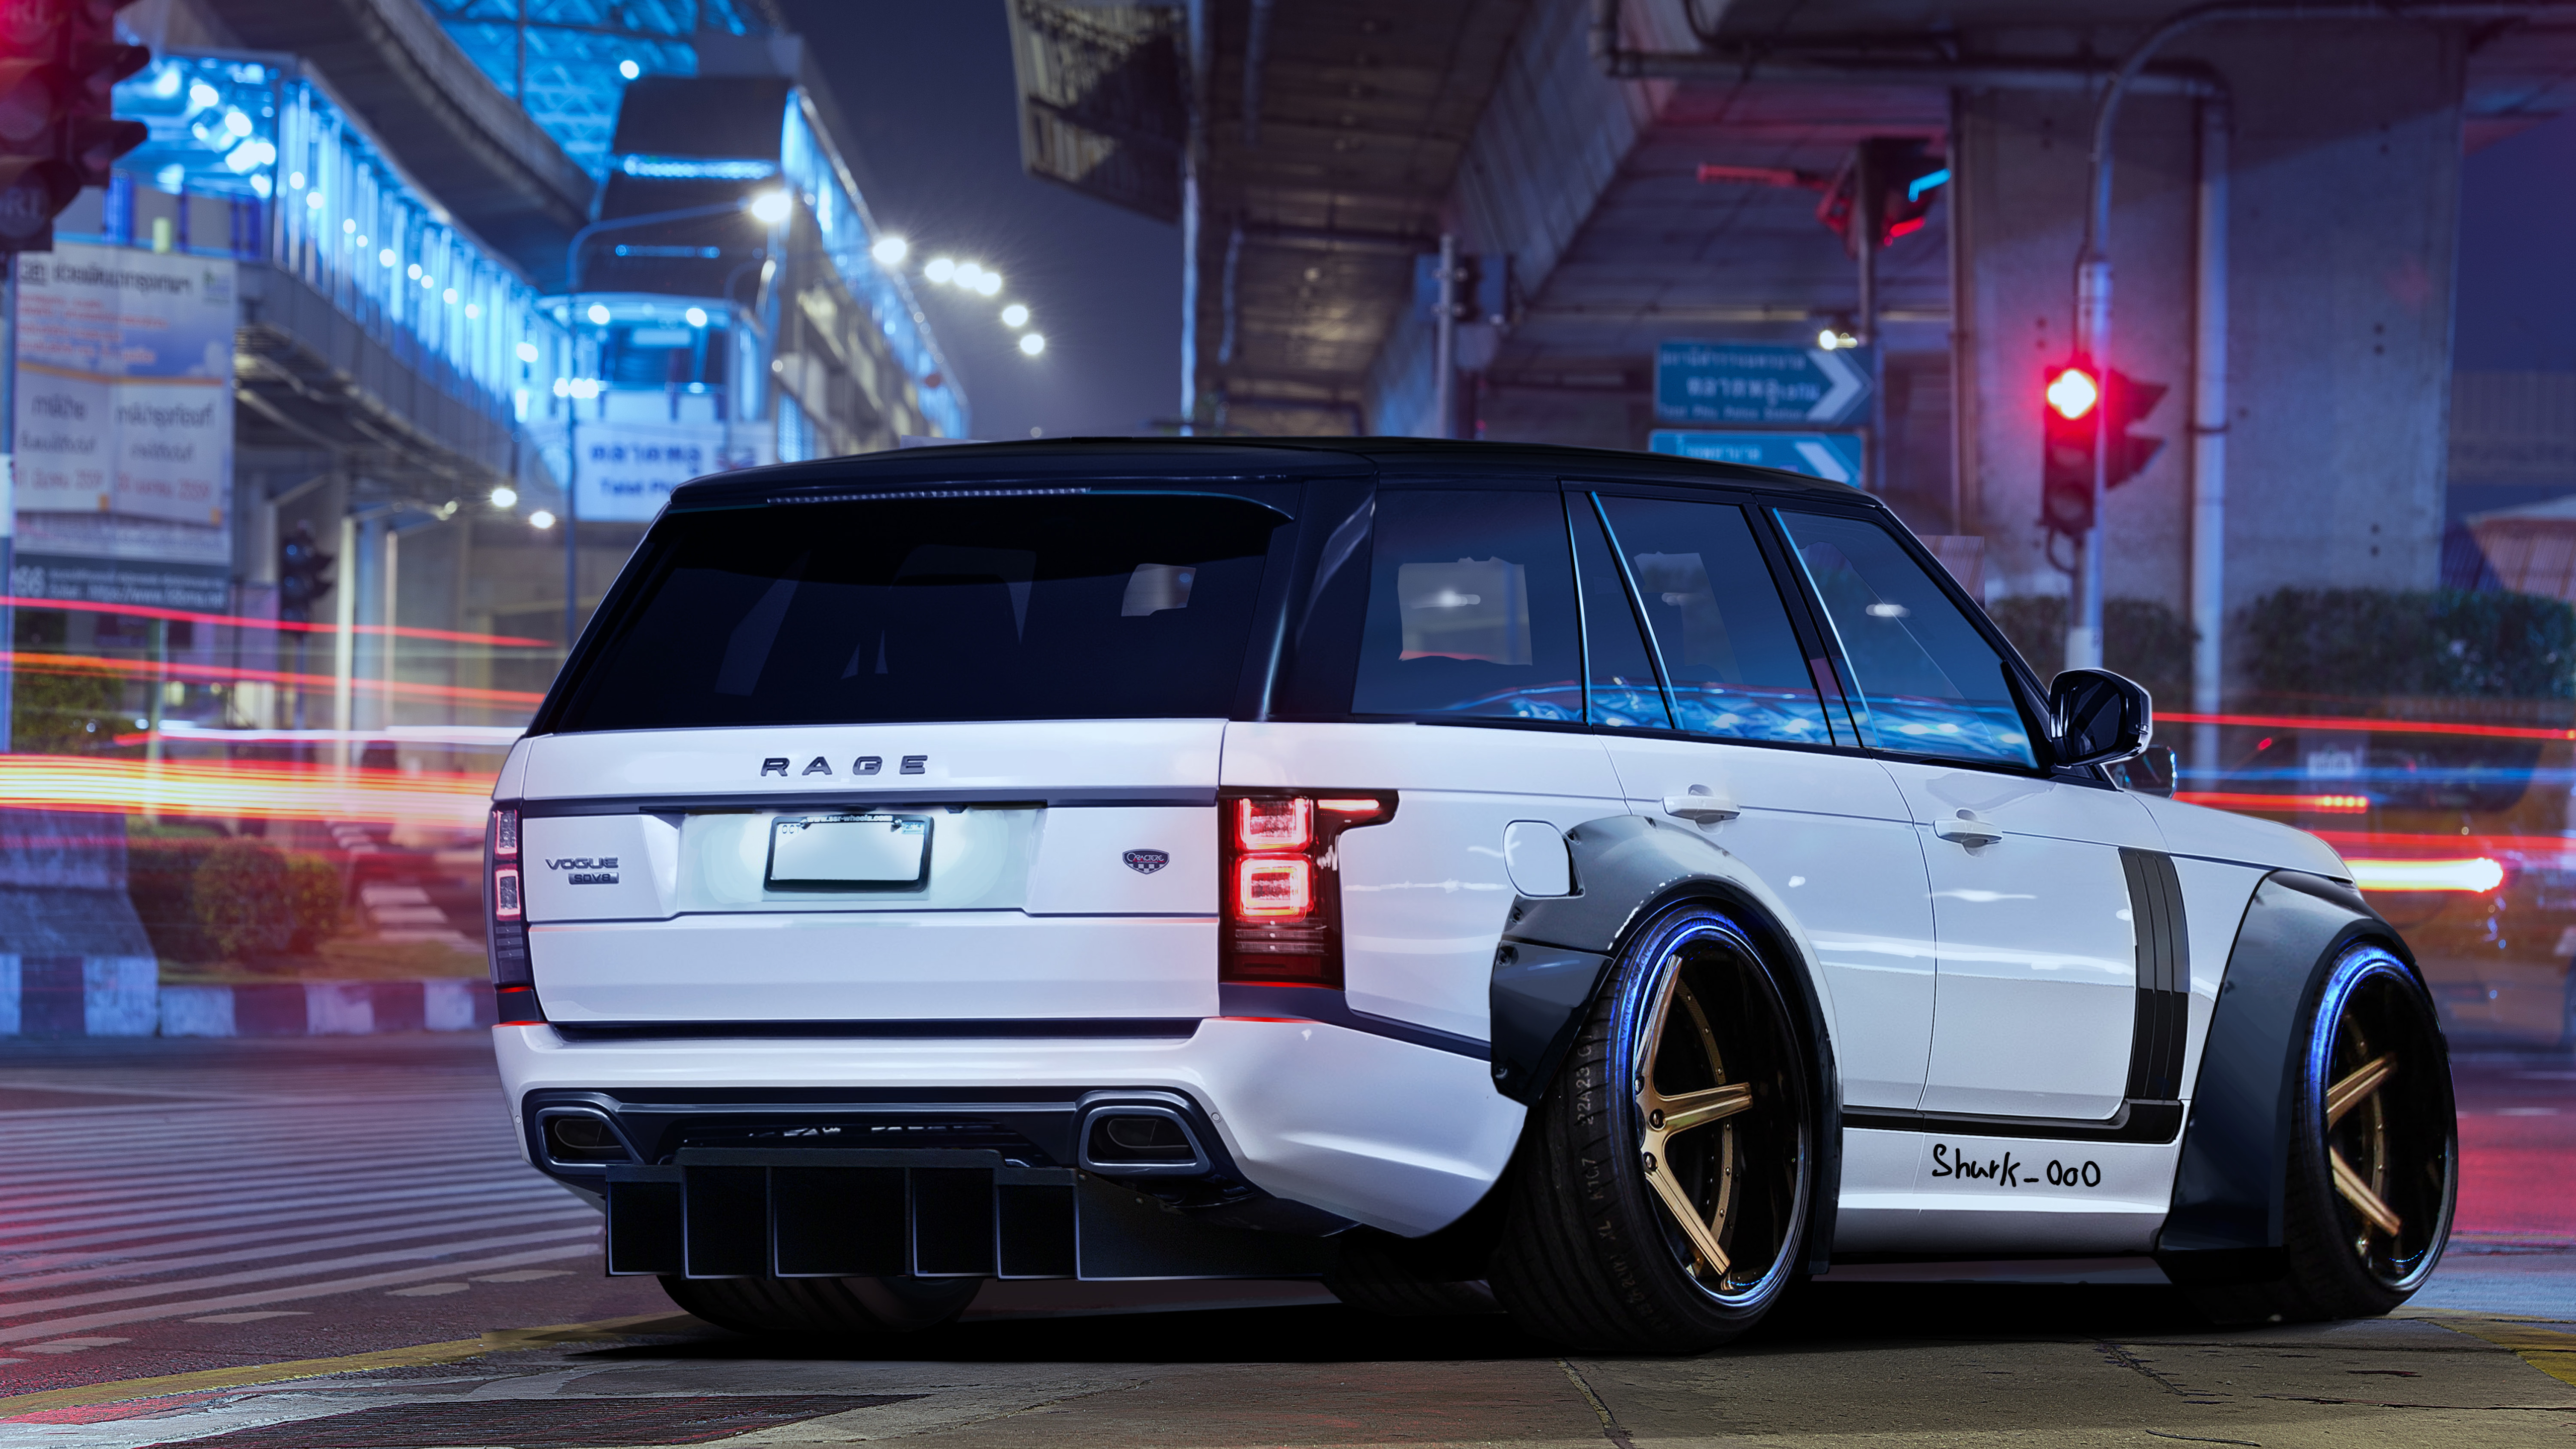 Range Rover Hd Wallpapers For Pc